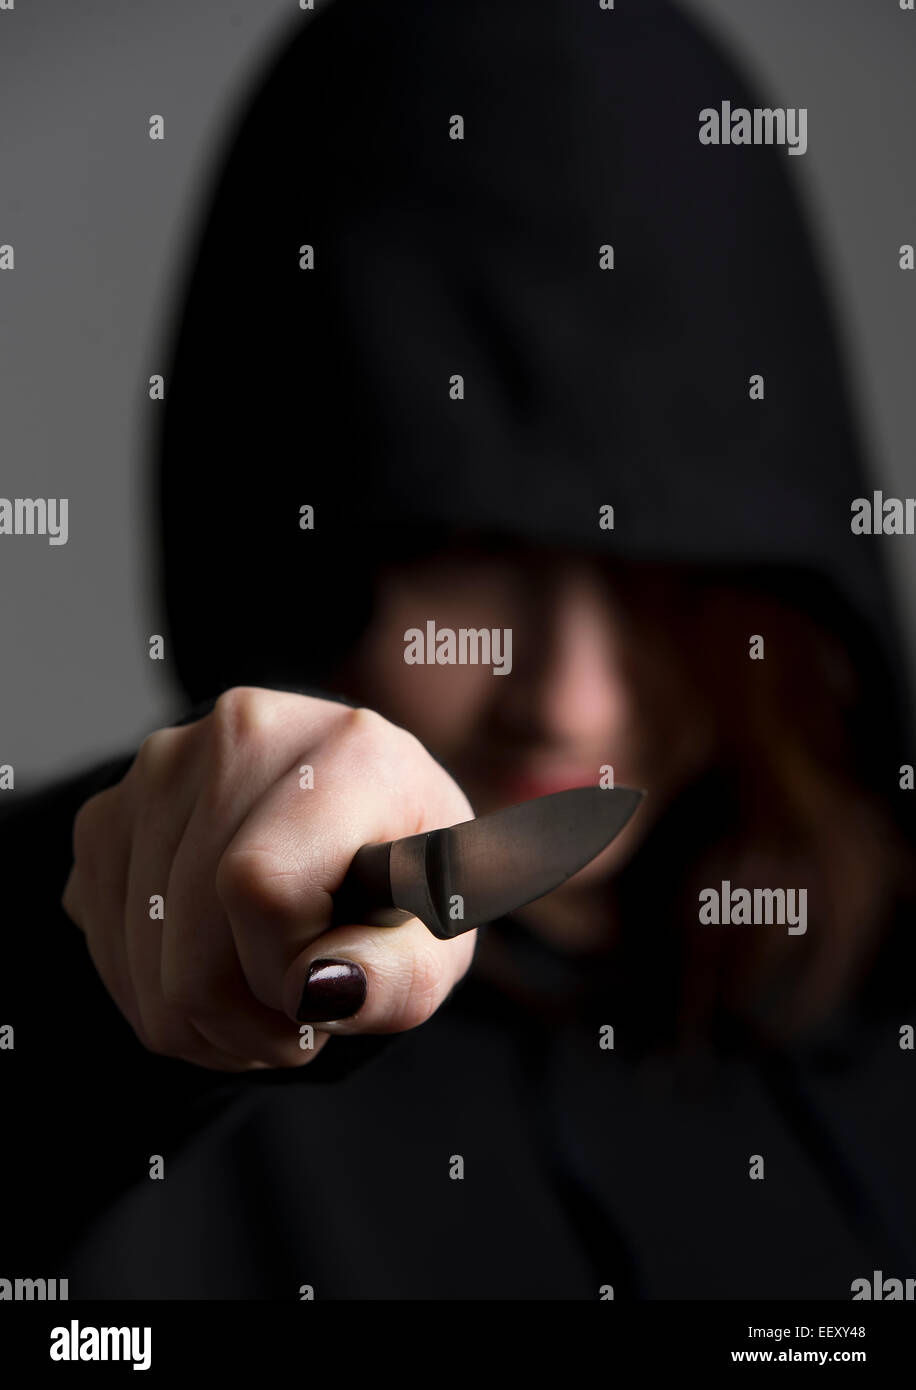 Female wearing a hooded top or 'hoodie' brandishing a knife symbolizing gang culture. Stock Photo